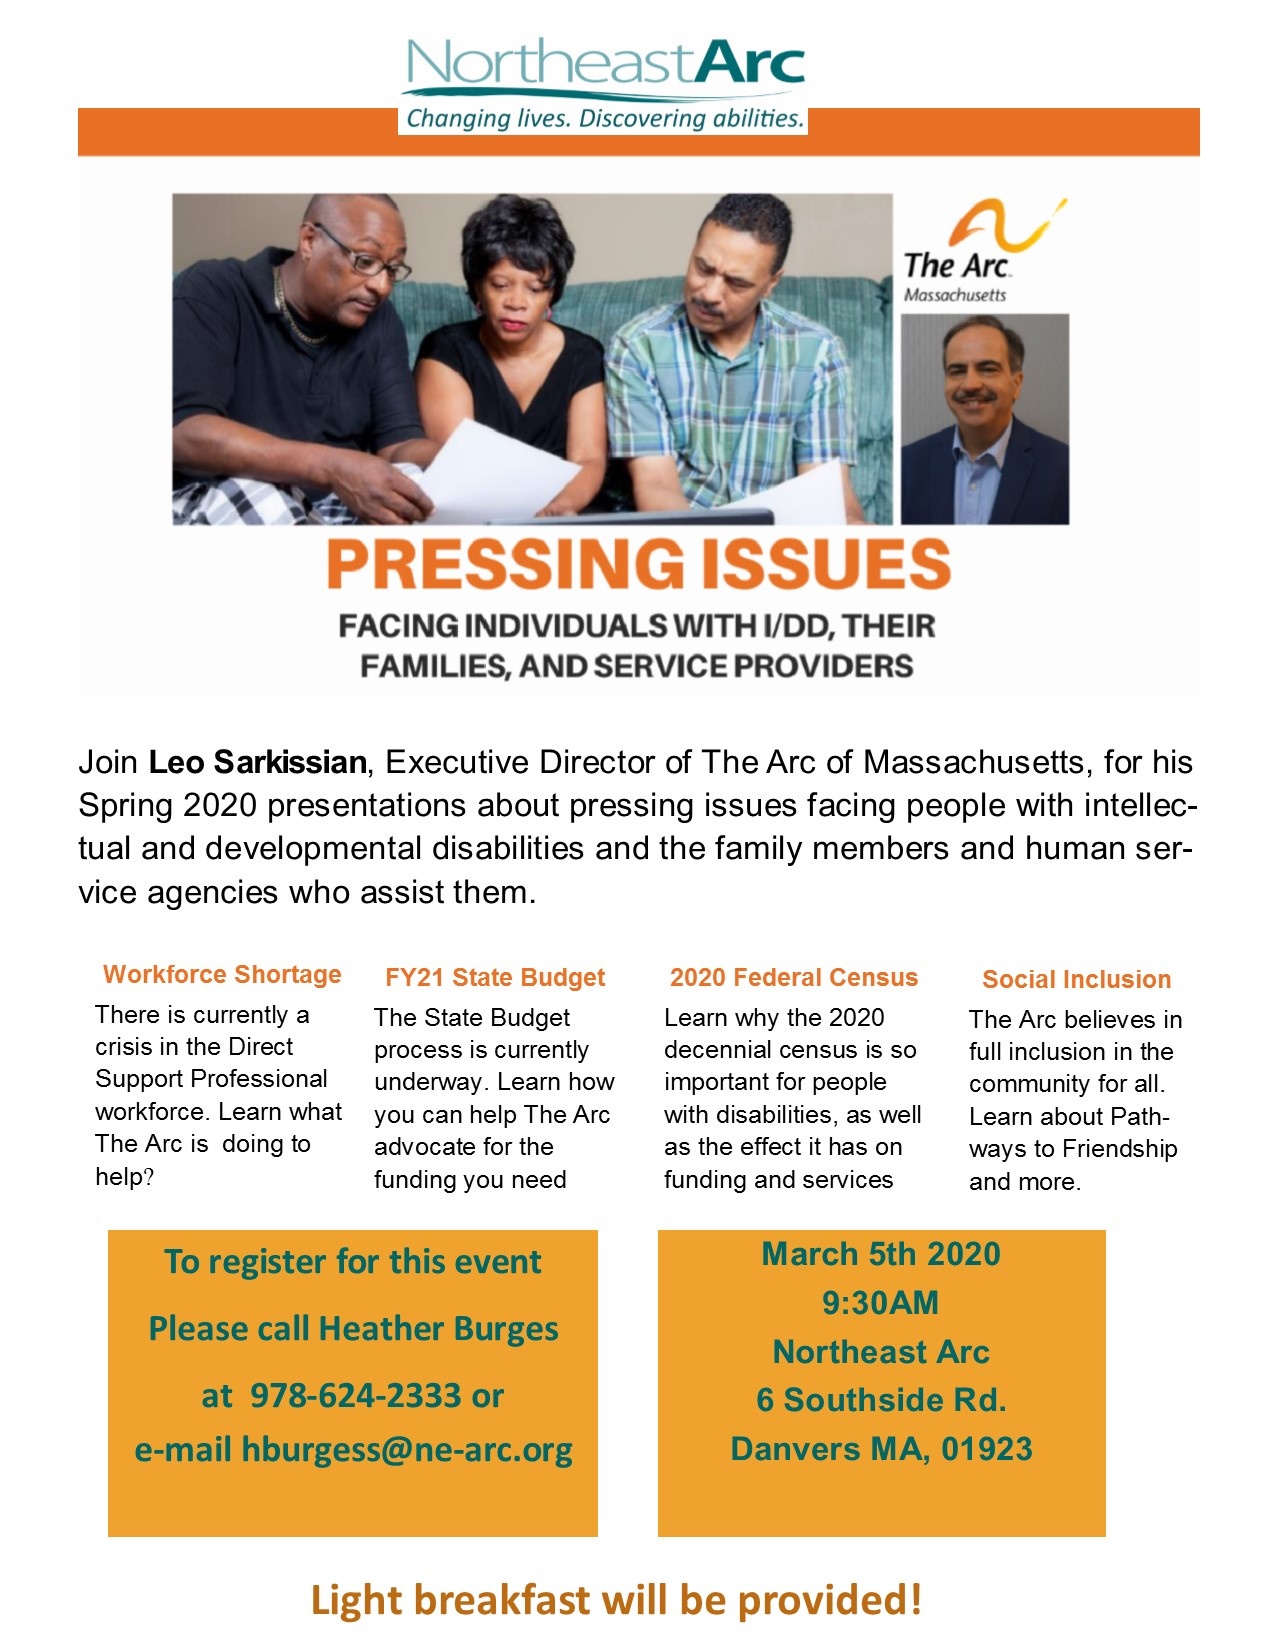 Pressing Issues with the Arc of Massachusetts; March 5th at 9:30 am, Northeast Arc 6 Southside Road Danvers MA